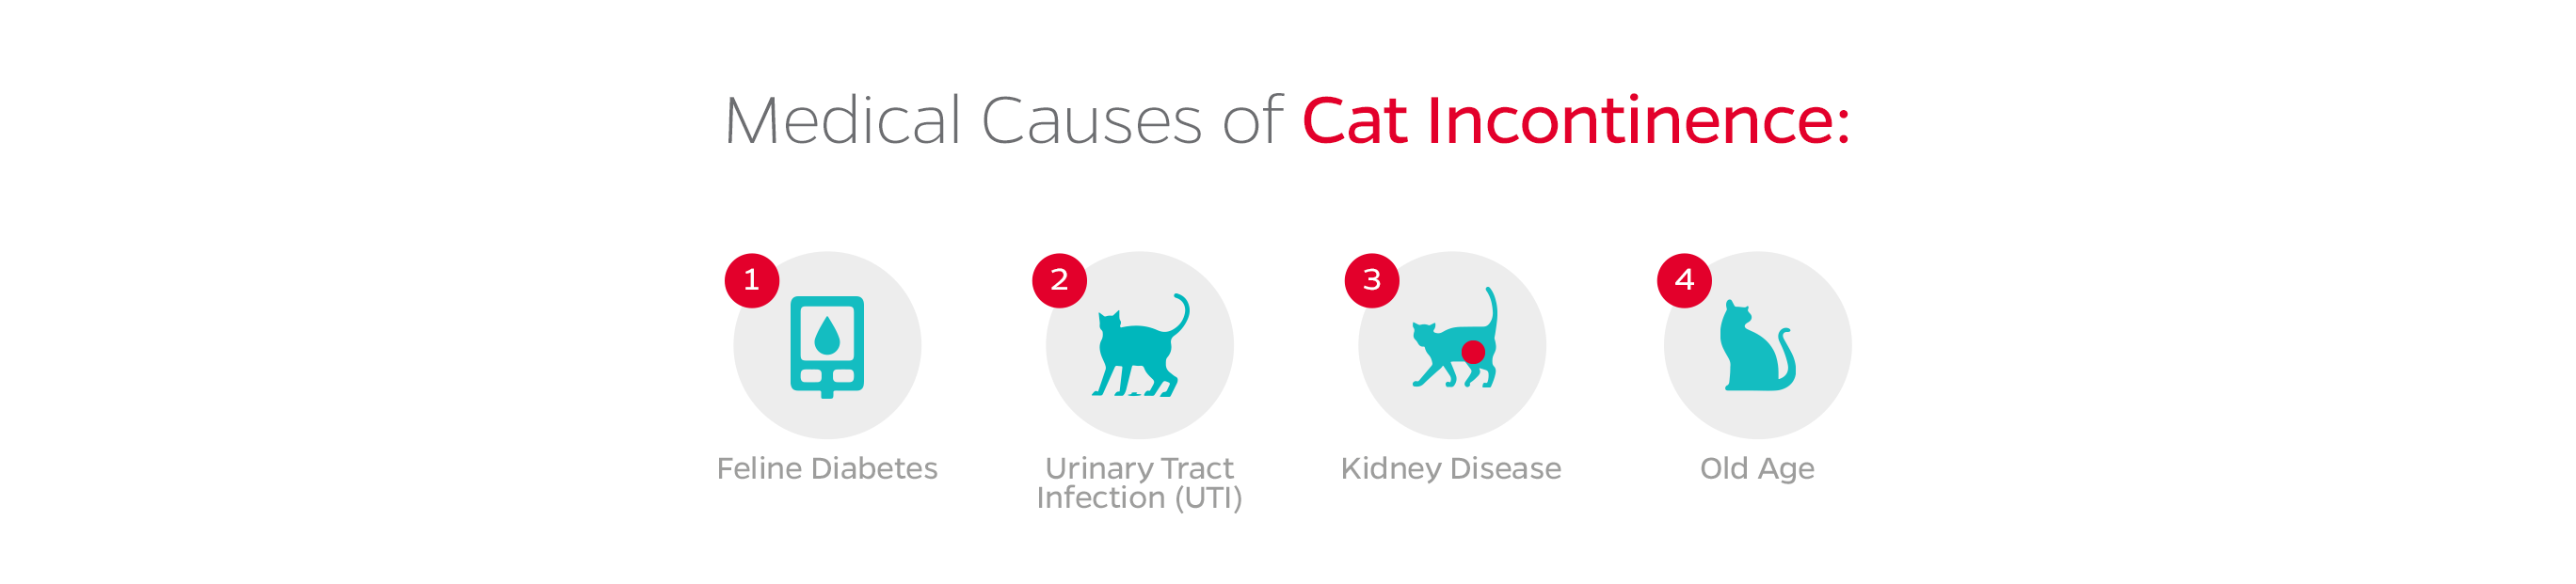 What causes urine incontinence in cats